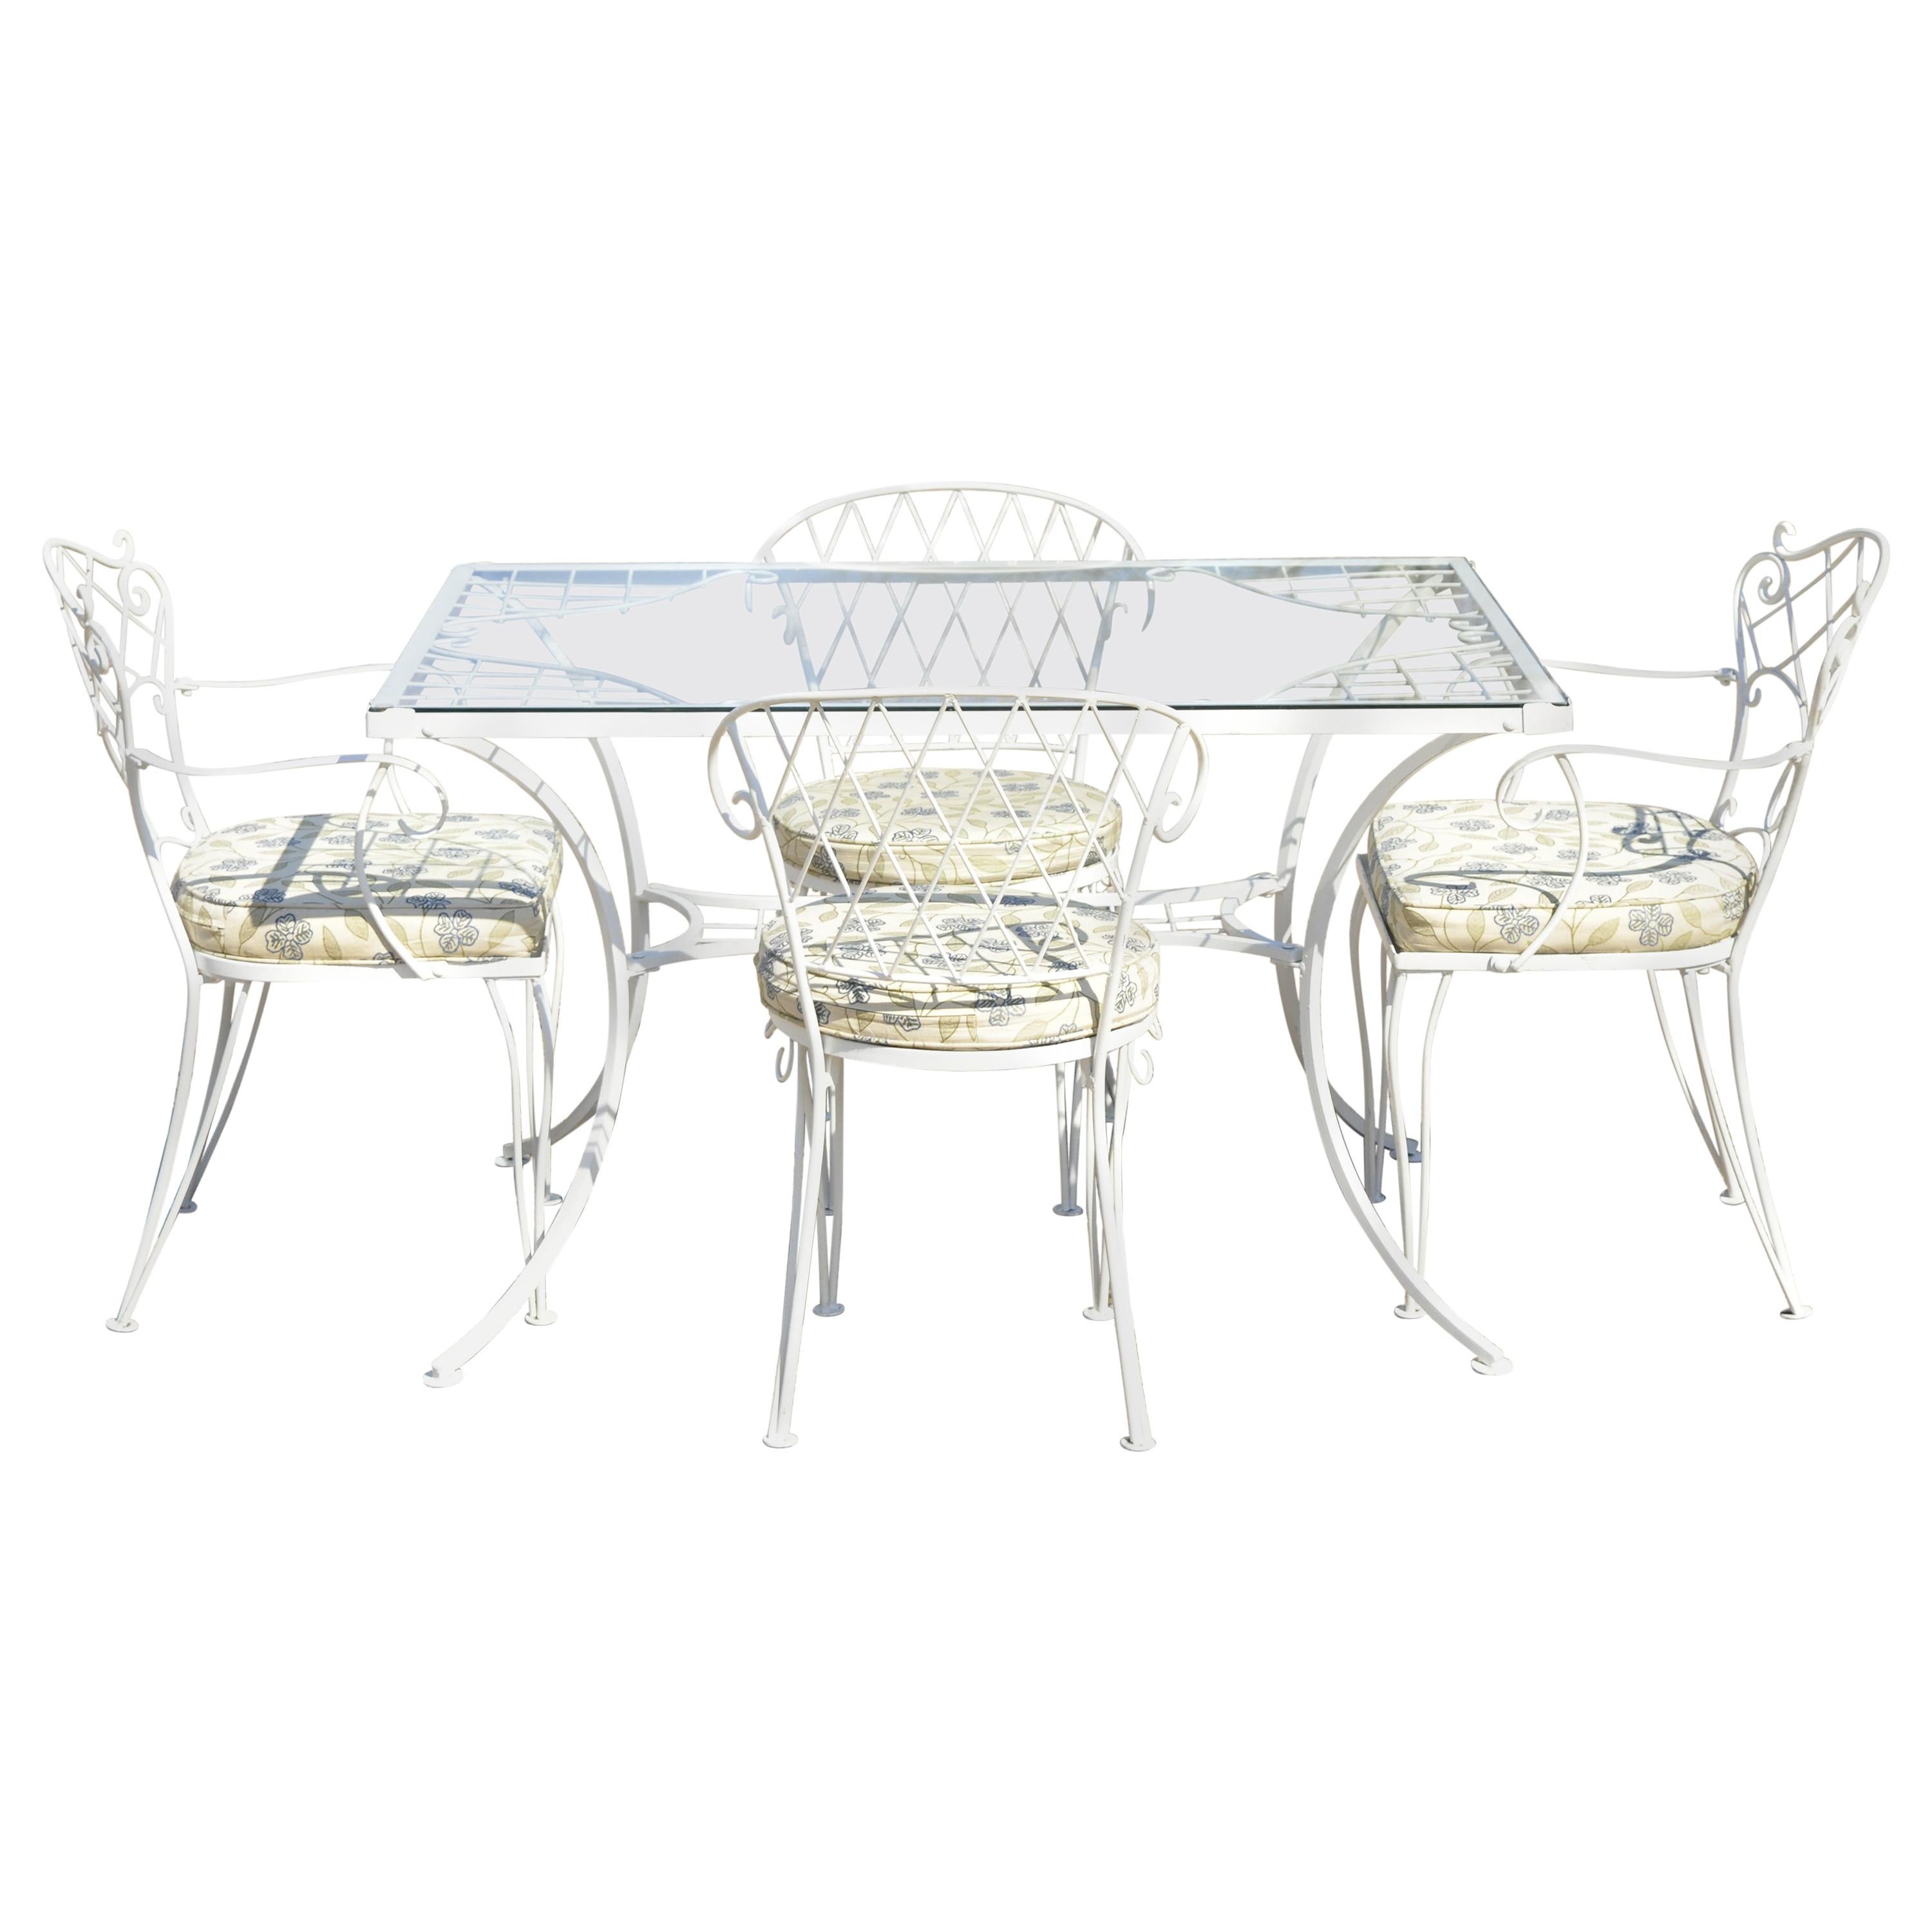 French Victorian Style White Wrought Iron Lattice Garden Patio Dining Set, 5 Pc For Sale